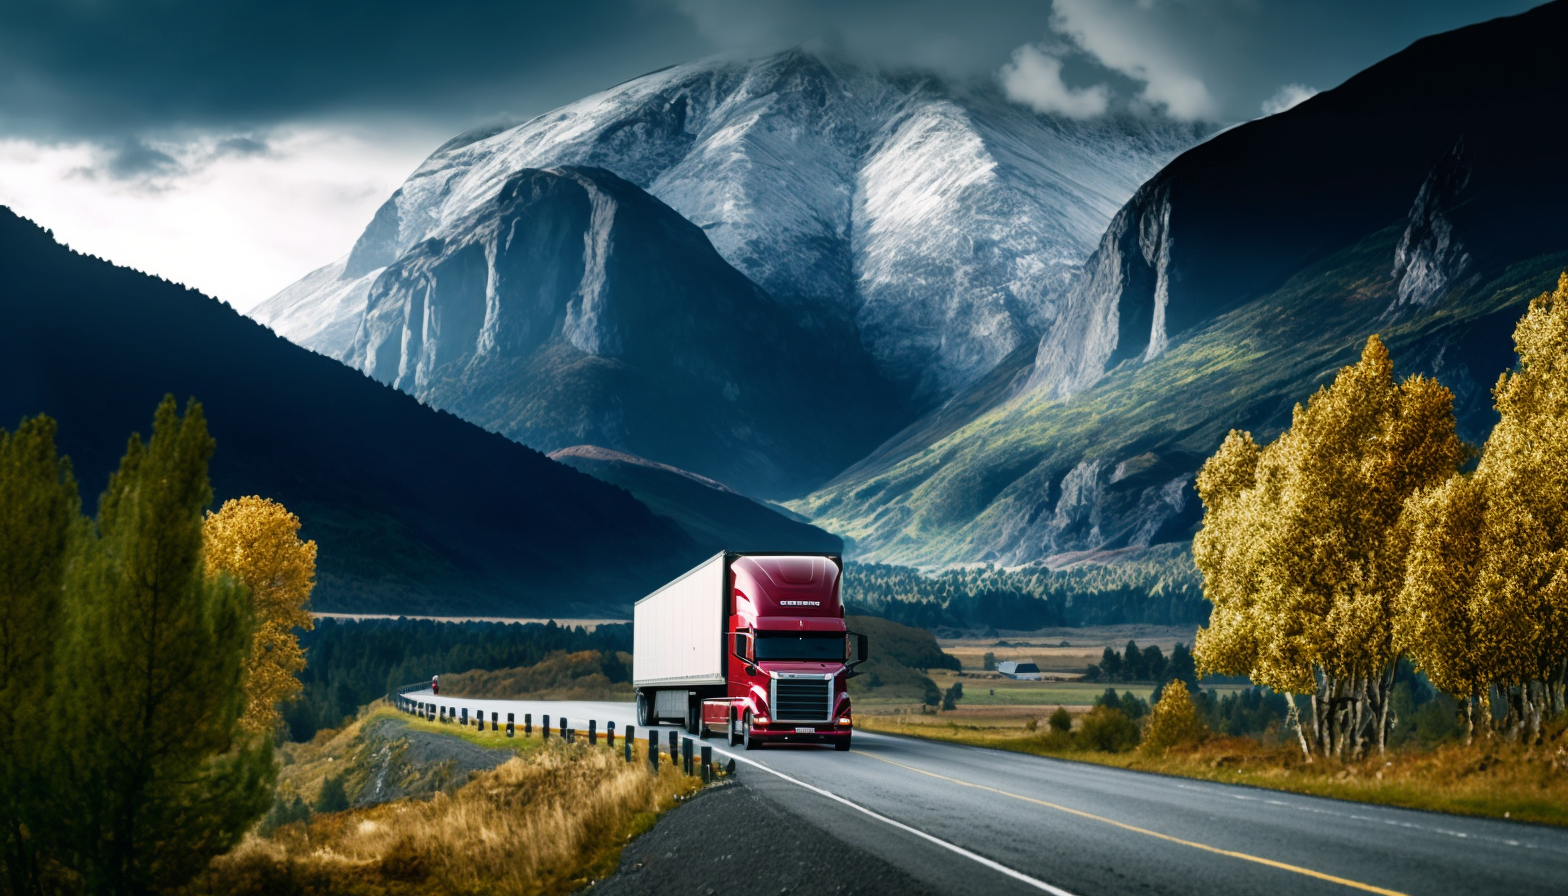 Truck_driving_on_the_road_in_the_mountains_8k_ultra_high_qu_ae0b21f8-f23b-48c8-96e4-57ecfd4081e2